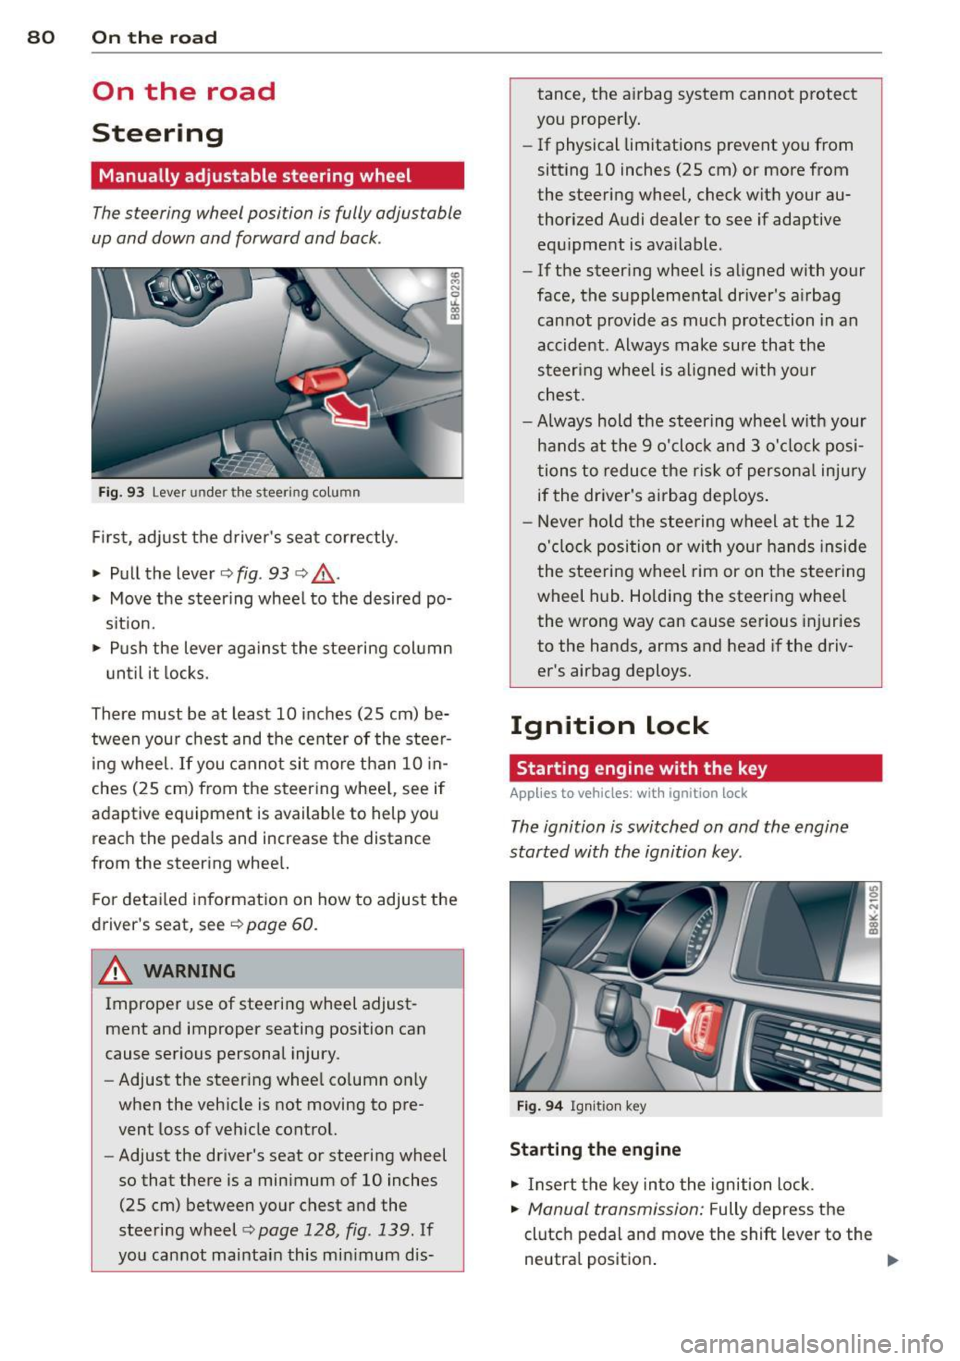 AUDI A4 2013  Owners Manual 80  On  the  road 
On  the  road 
Steering 
Manually  adjustable  steering  wheel 
The steering  wheel  position  is fully  adjustable 
up  and  down  and  forward  and  bock . 
Fig. 93 Lever under th